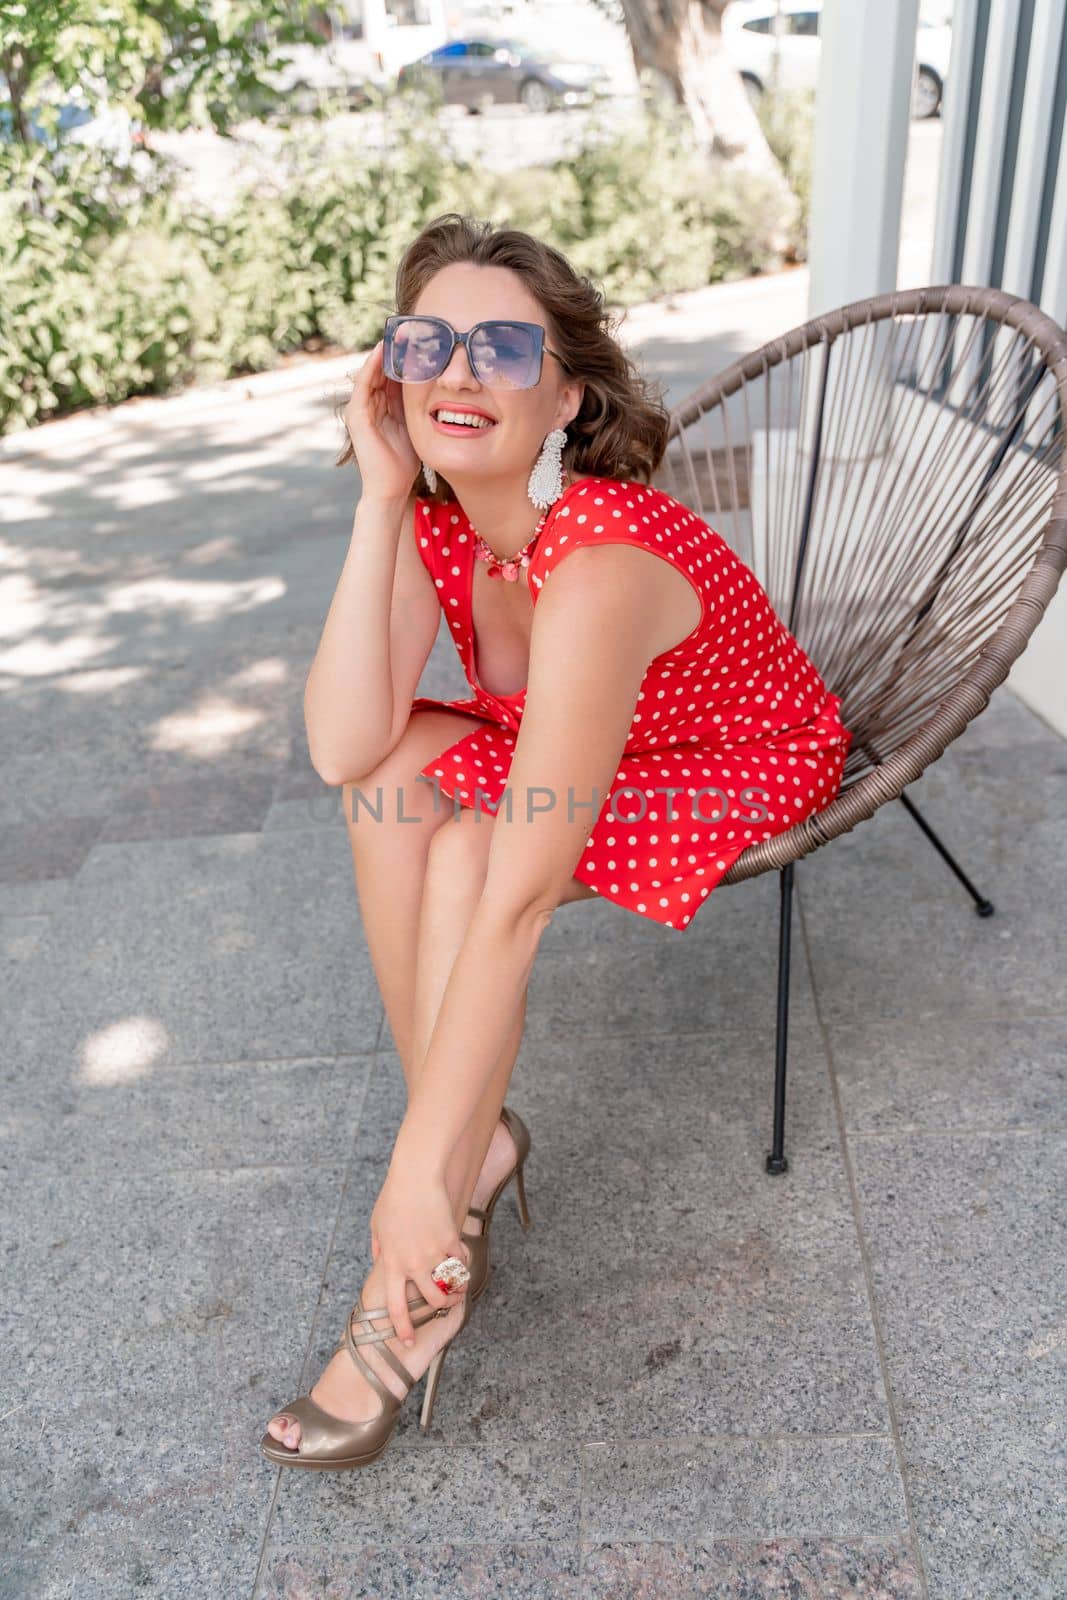 Portrait of a woman with glasses. Photo of a fashionable girl with beautiful brown hair, dressed in a red sundress with polka dots, sits in a chair on the street